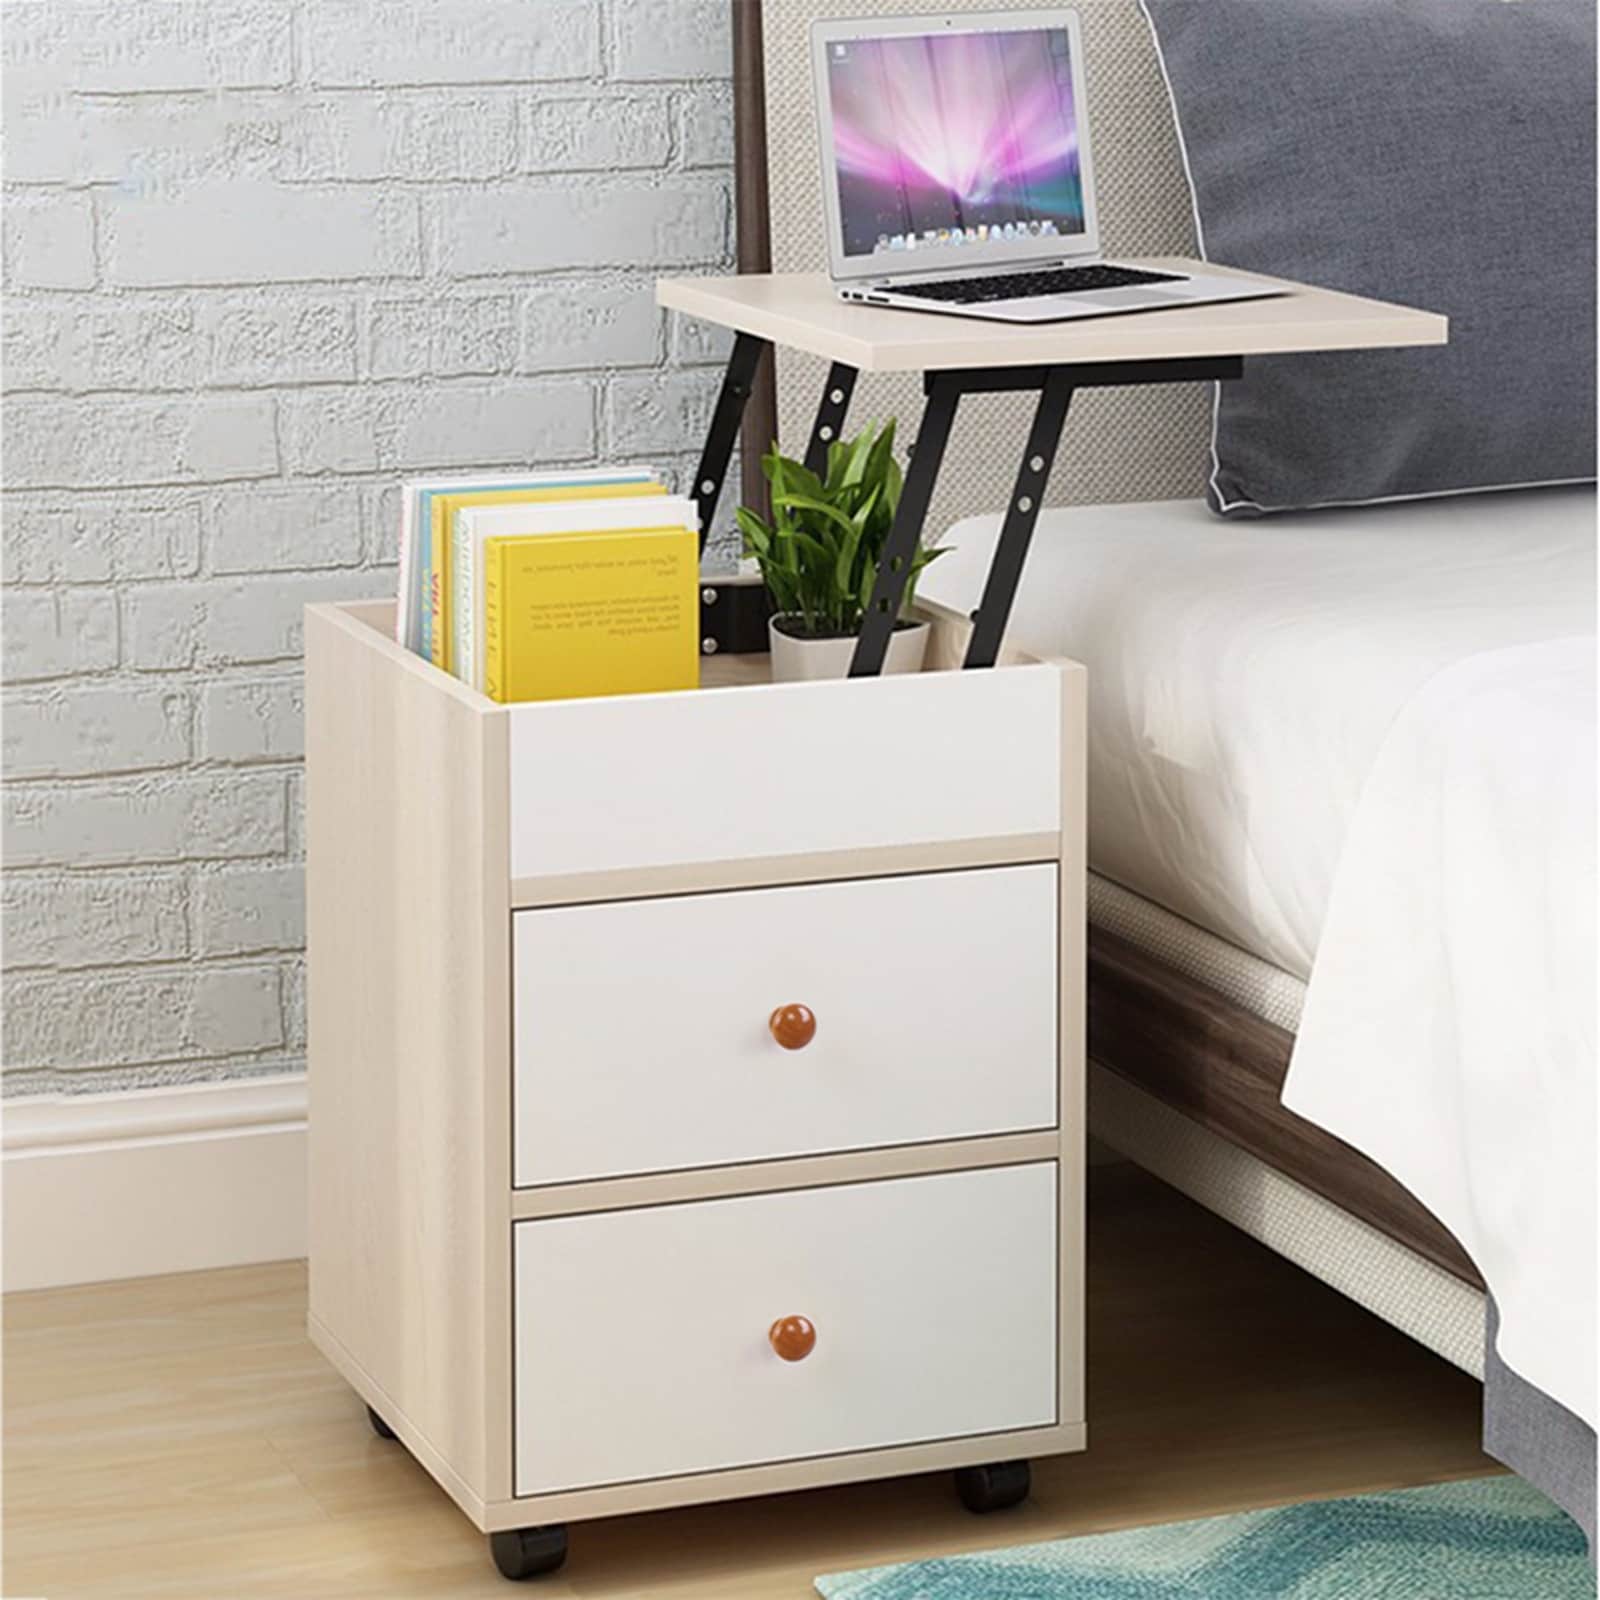 Height Adjustable Bedside Table End Table Laptop Desk with 2 Drawer and Hidden Storage Compartment 2 in 1 Upgrade Nightstand with Lift Top and Computer Table White